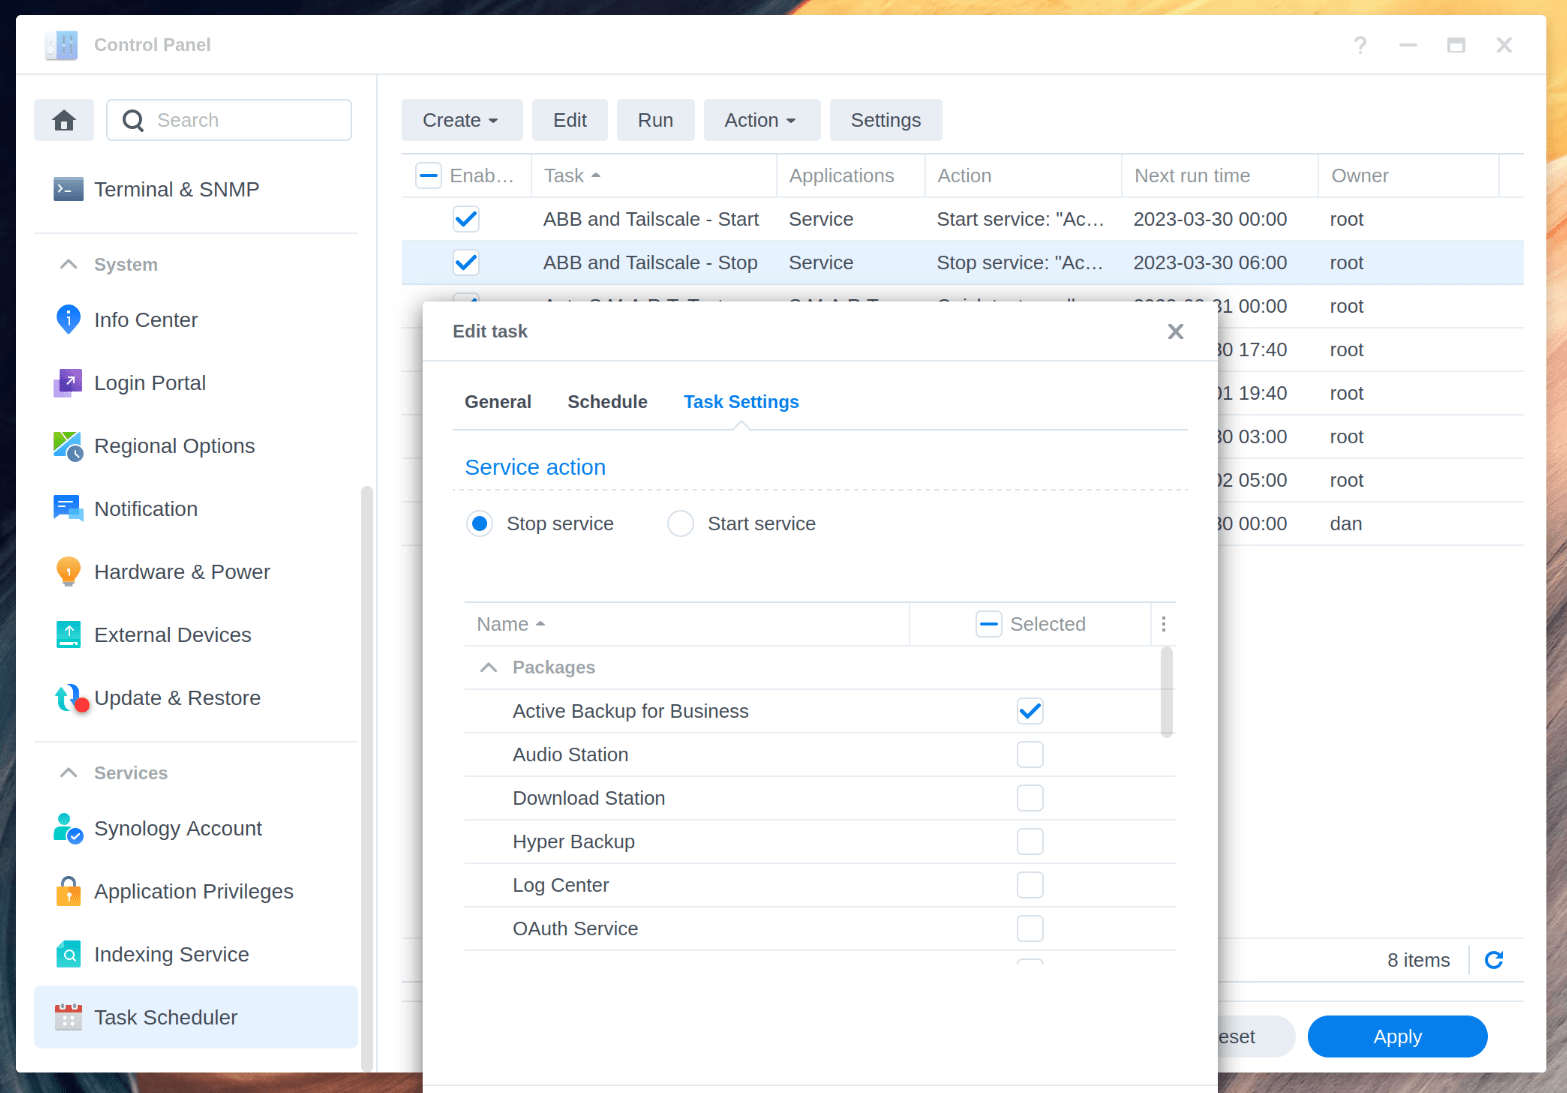 View of editing a service task in Synology Task Scheduler